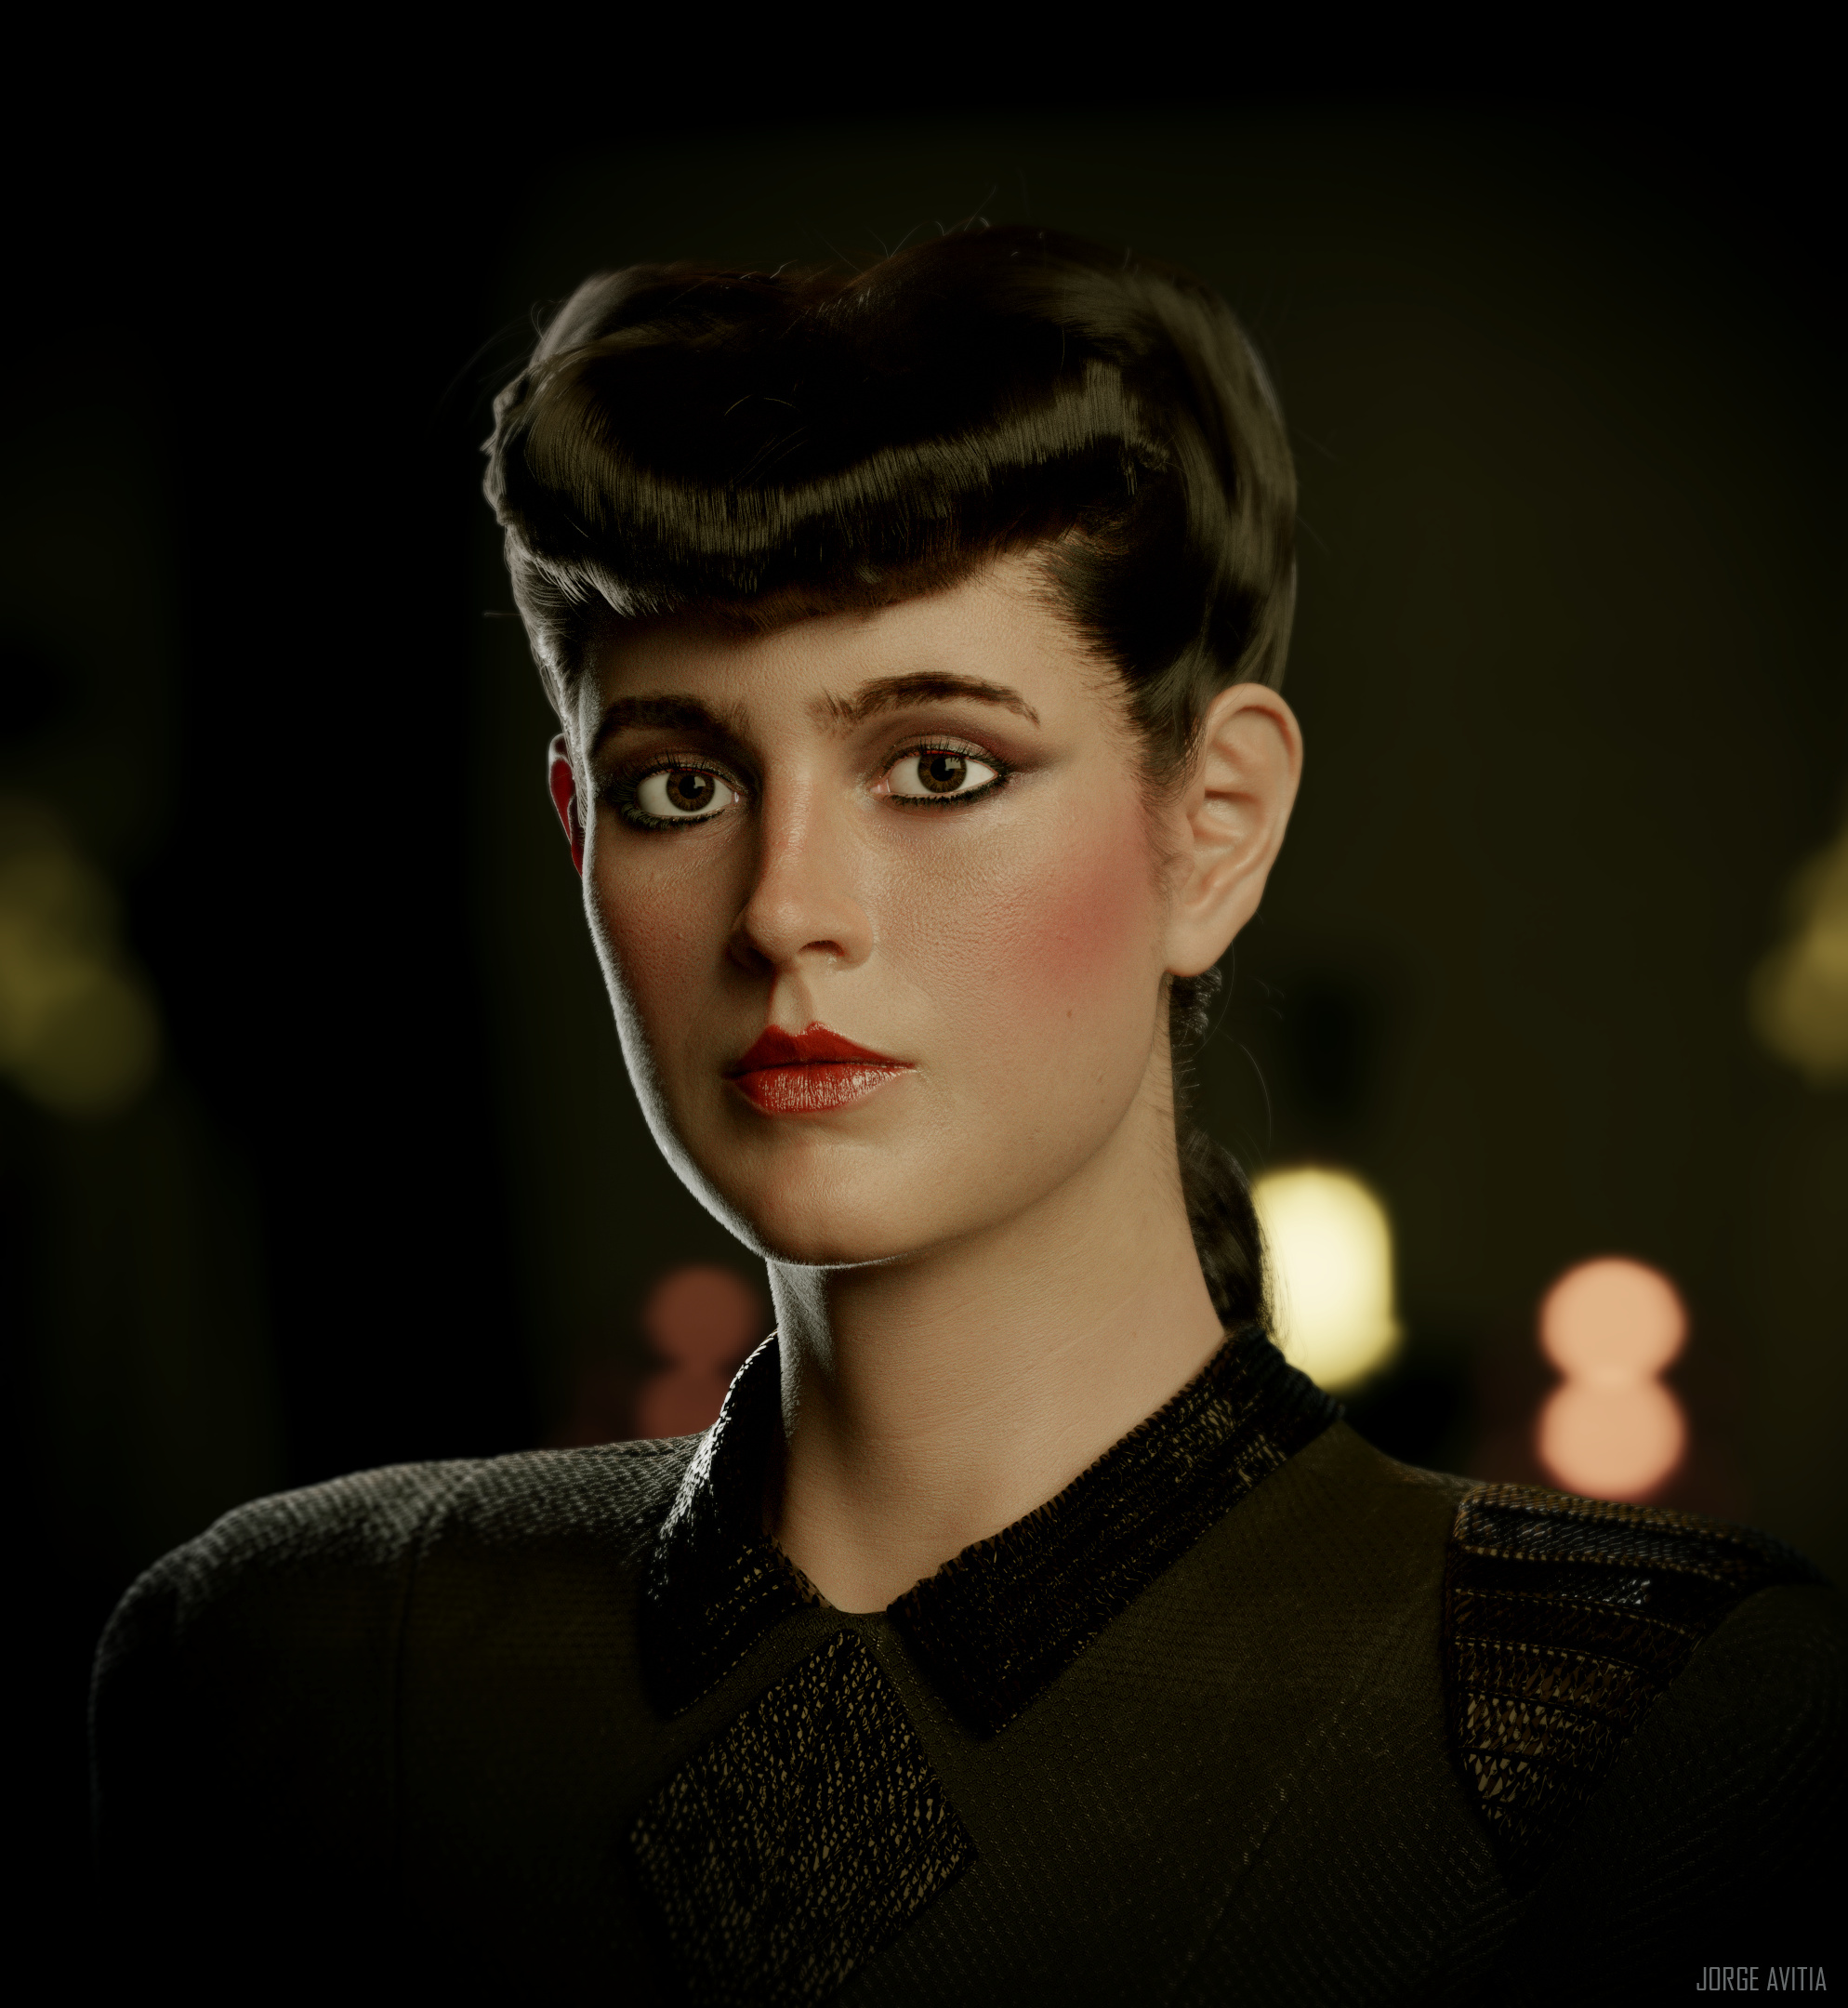 Rachael Blade Runner Finished Projects Blender Artists Community